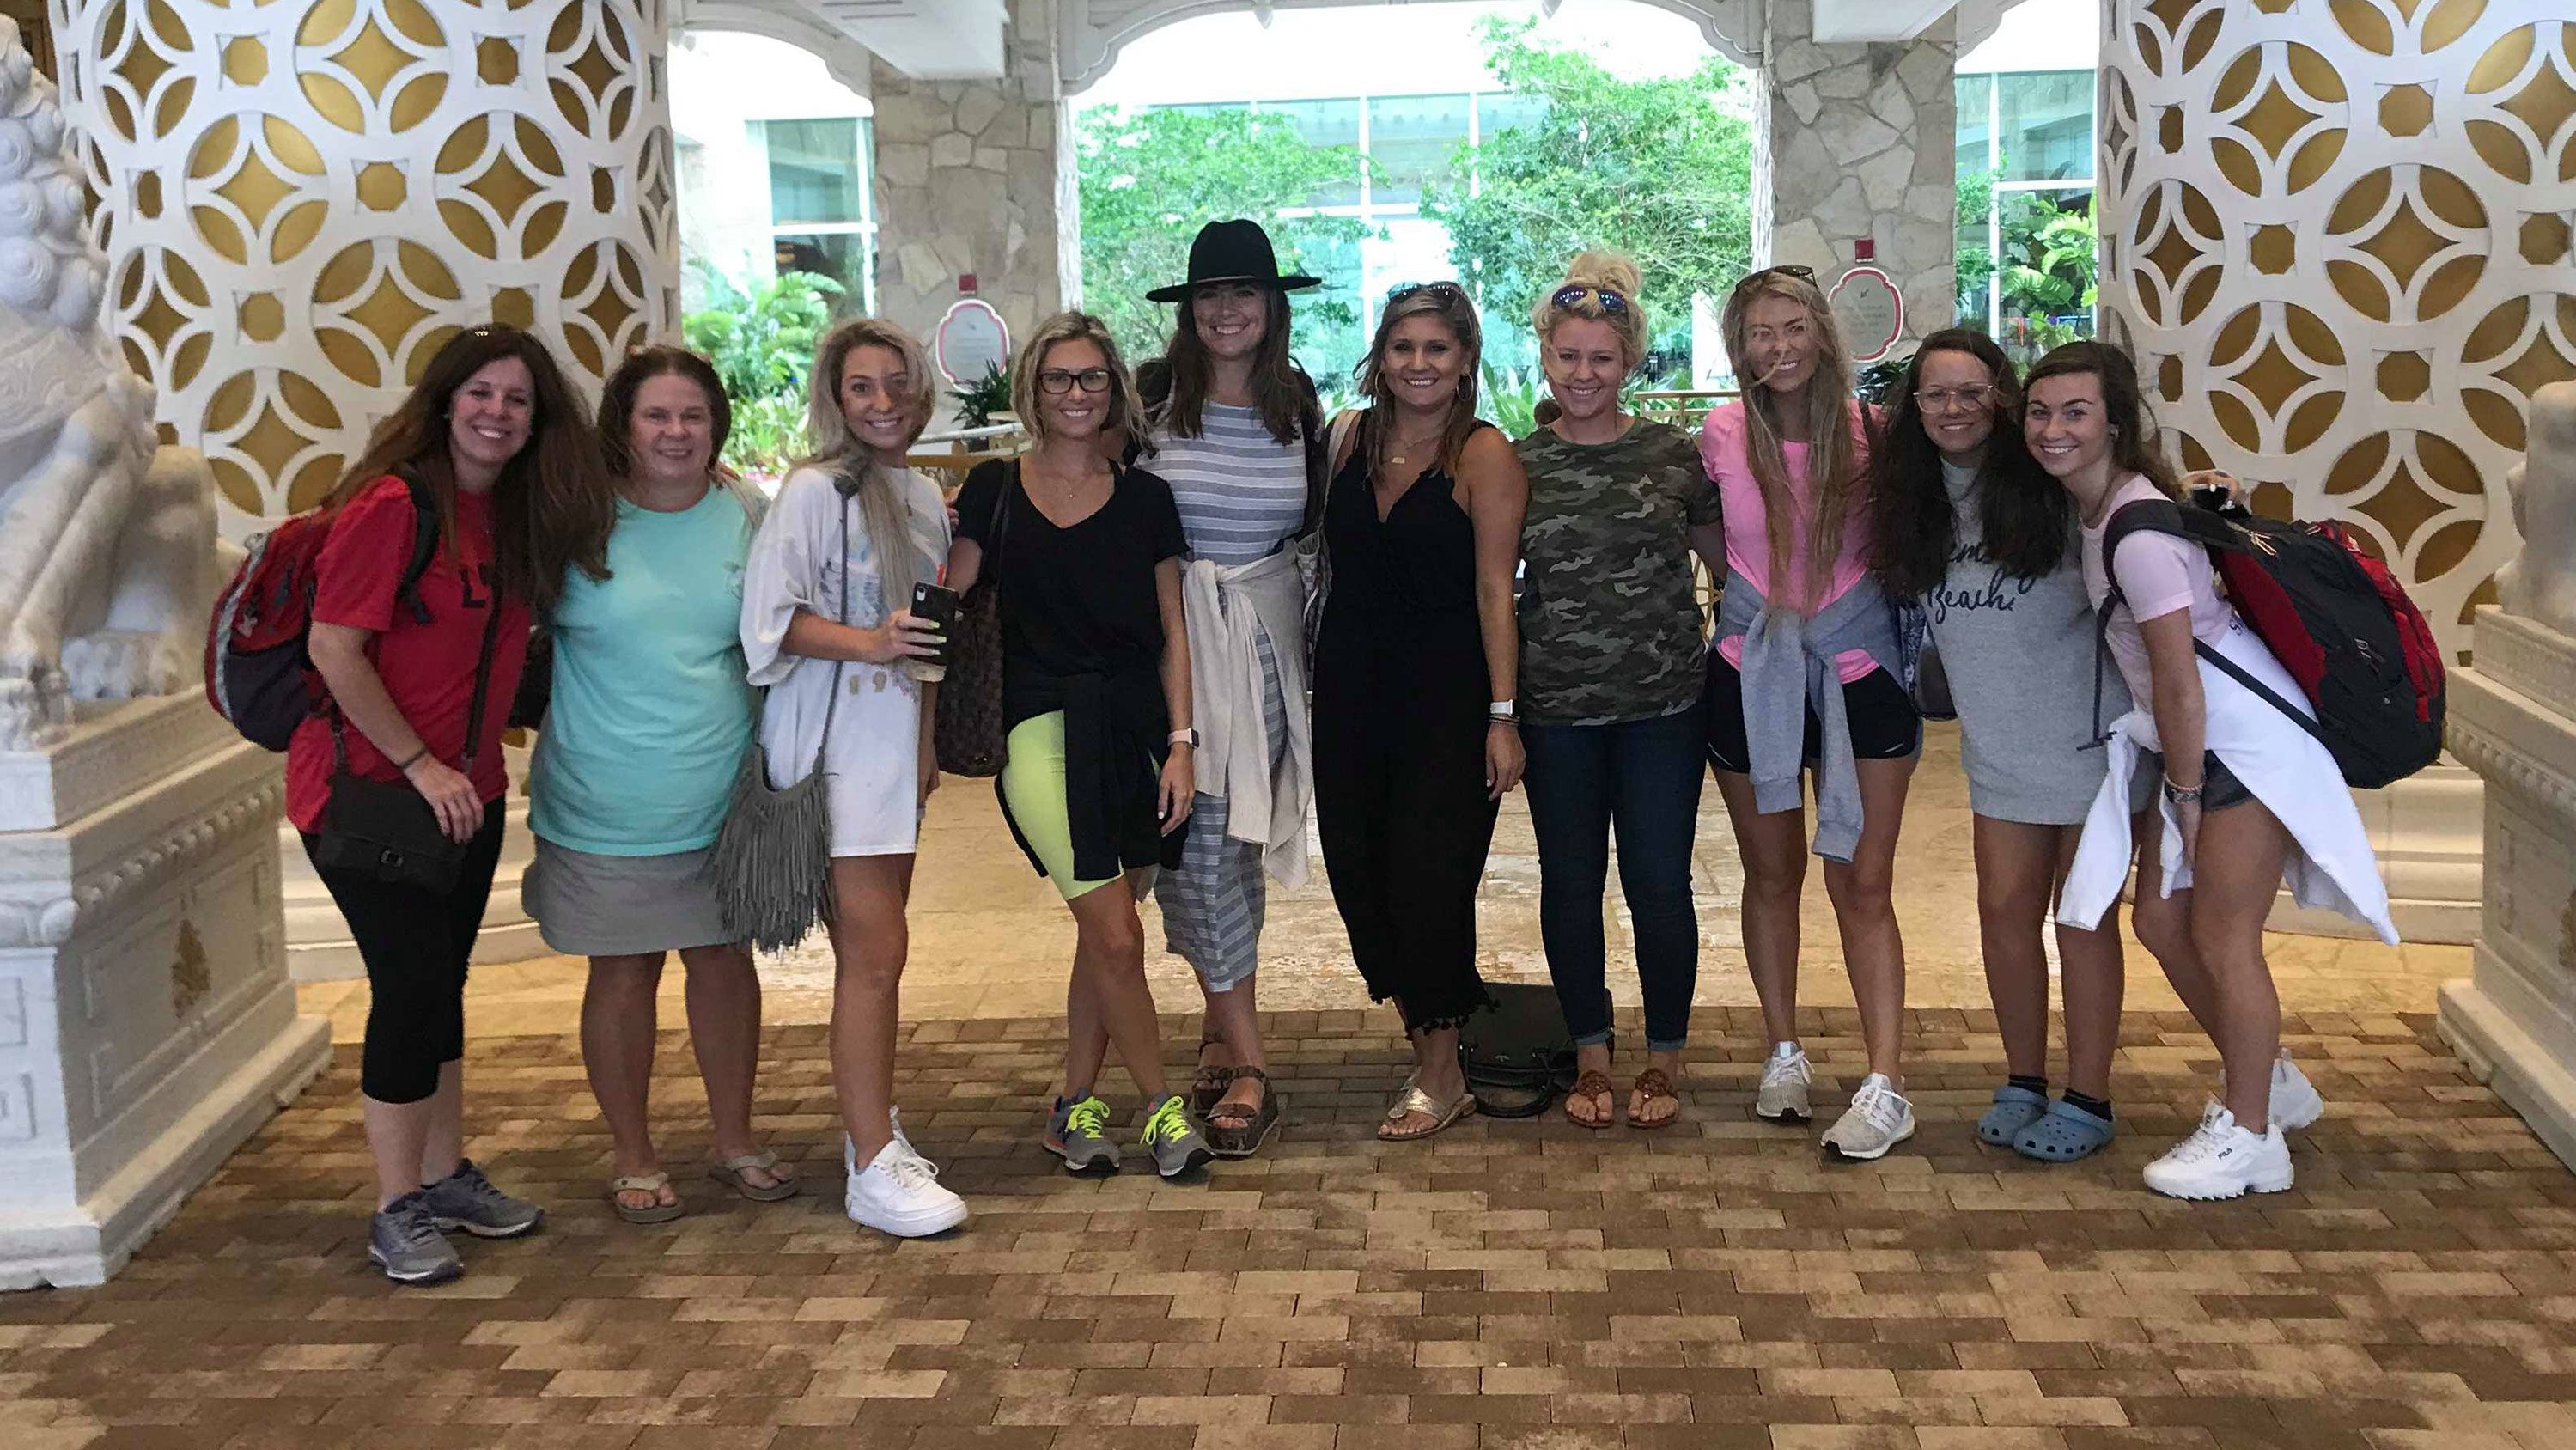 The bride to be, Rikki Kahley, fourth from left, poses with her bachelorette party, including her mother, Sandy Gibbs Kahley, second from left, and sister Chloe, third from left.